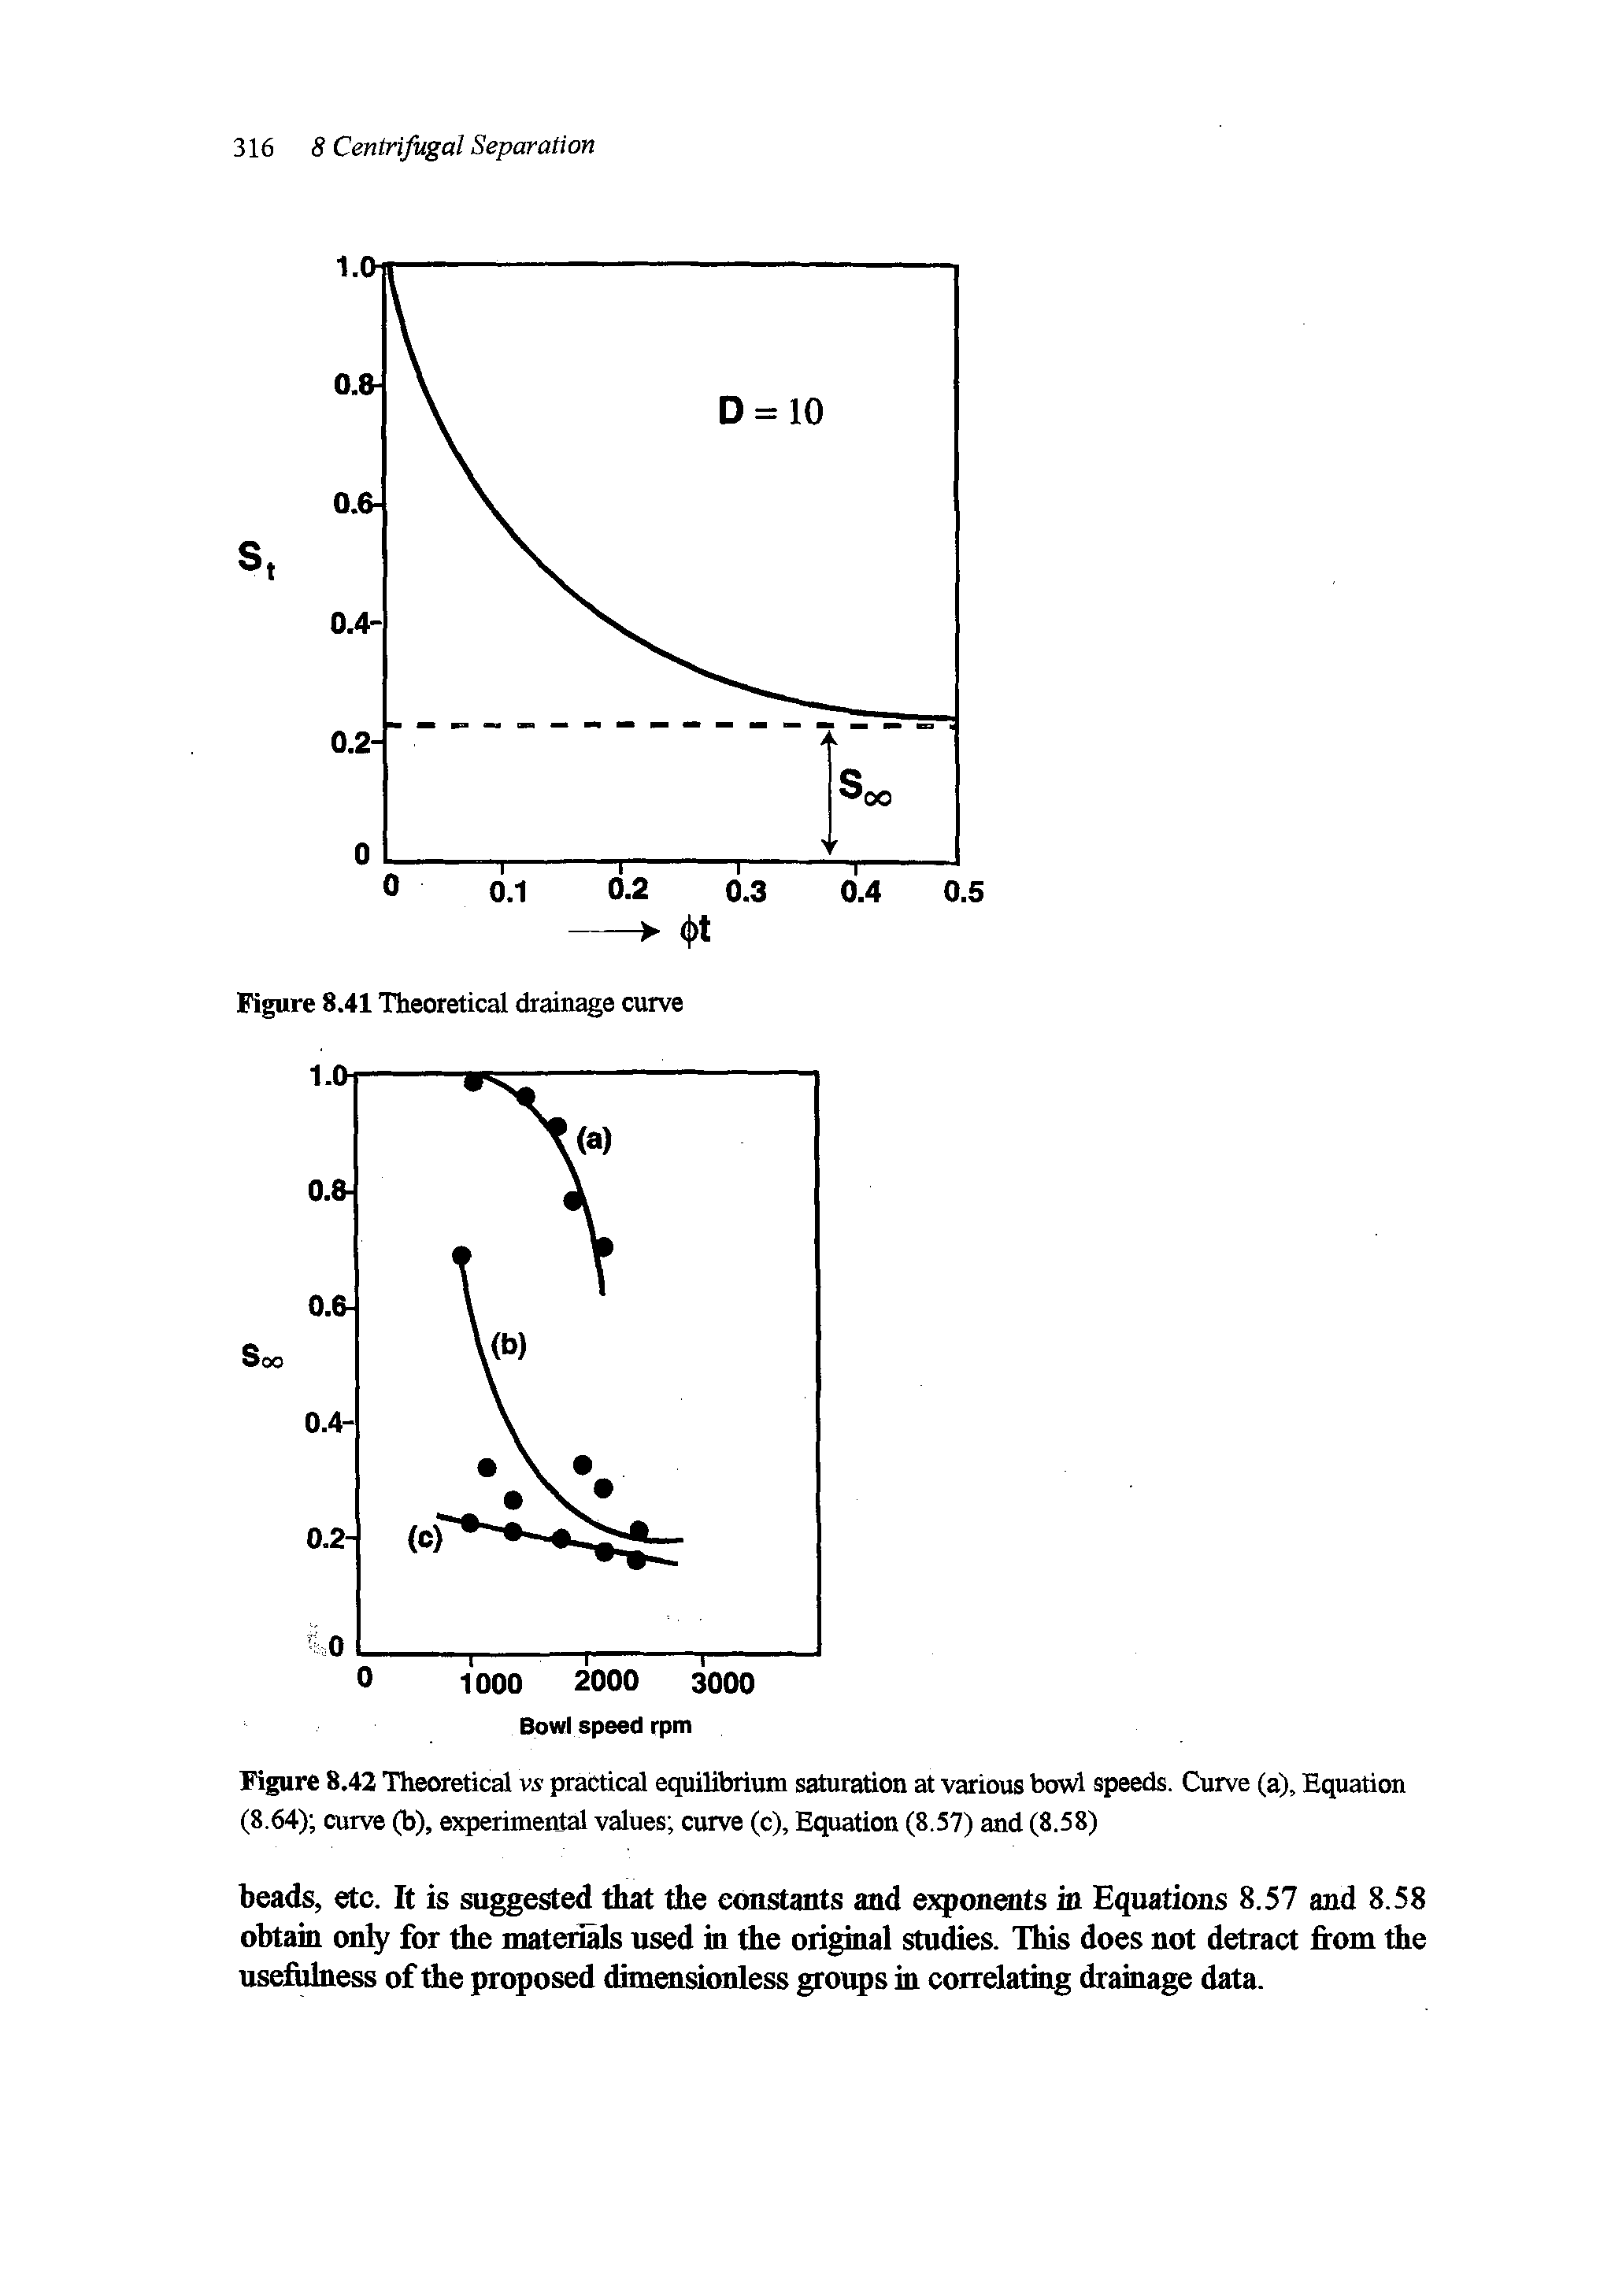 Figure 8,42 Theoretical vs practical equilibrium saturation at various bowl speeds. Curve (a). Equation (8.64) curve (b), experimental values curve (c). Equation (8.57) and (8.58)...